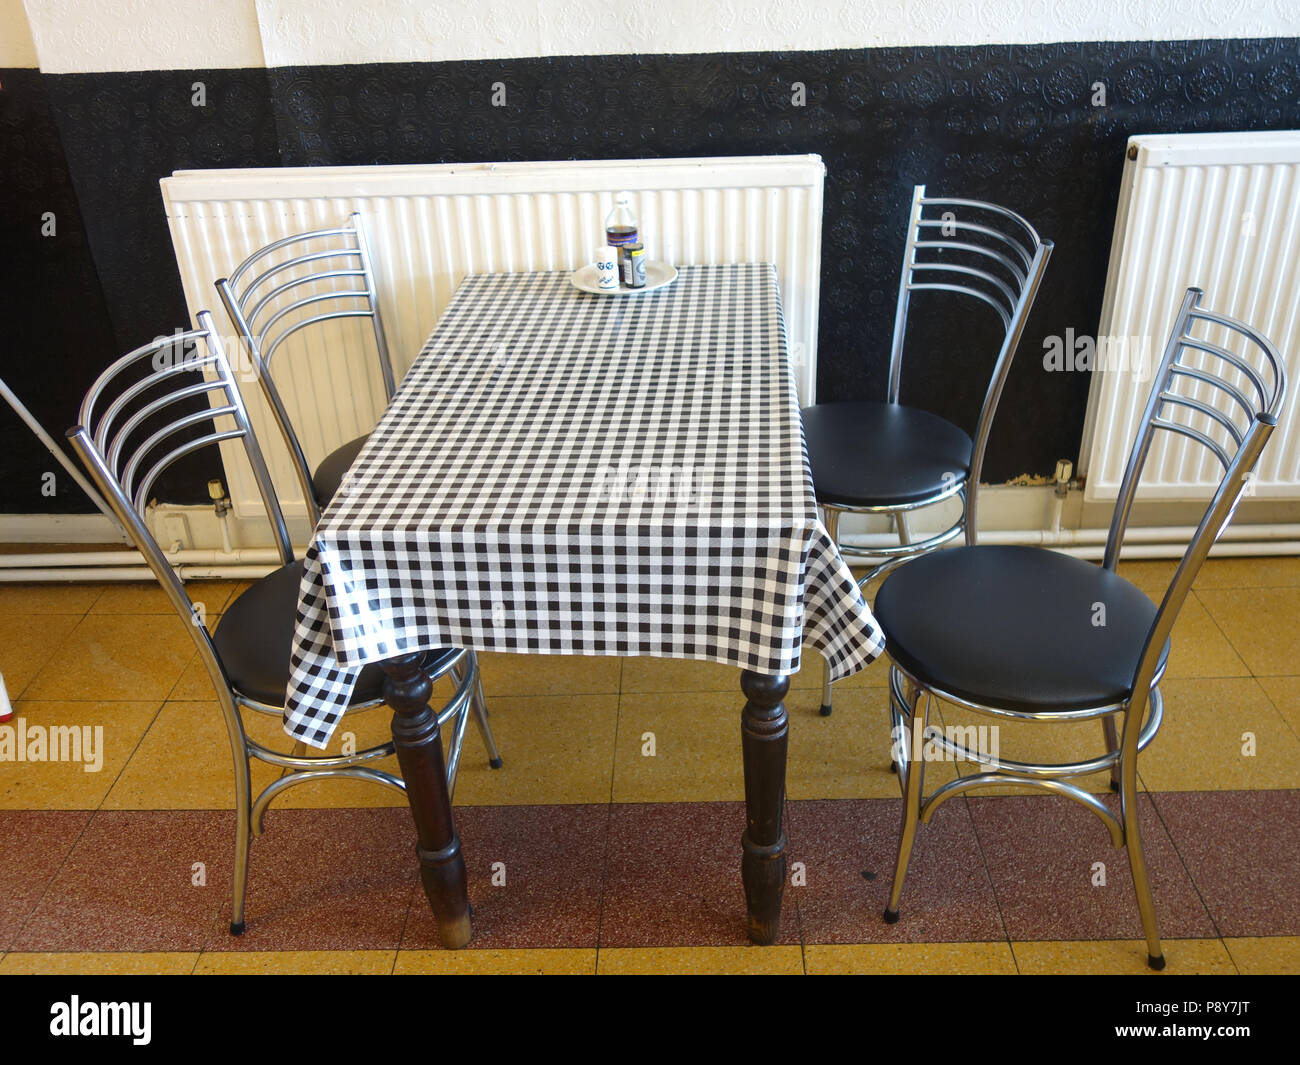 old fashioned style cafe table and chairs with checkered tablecloth Stock Photo